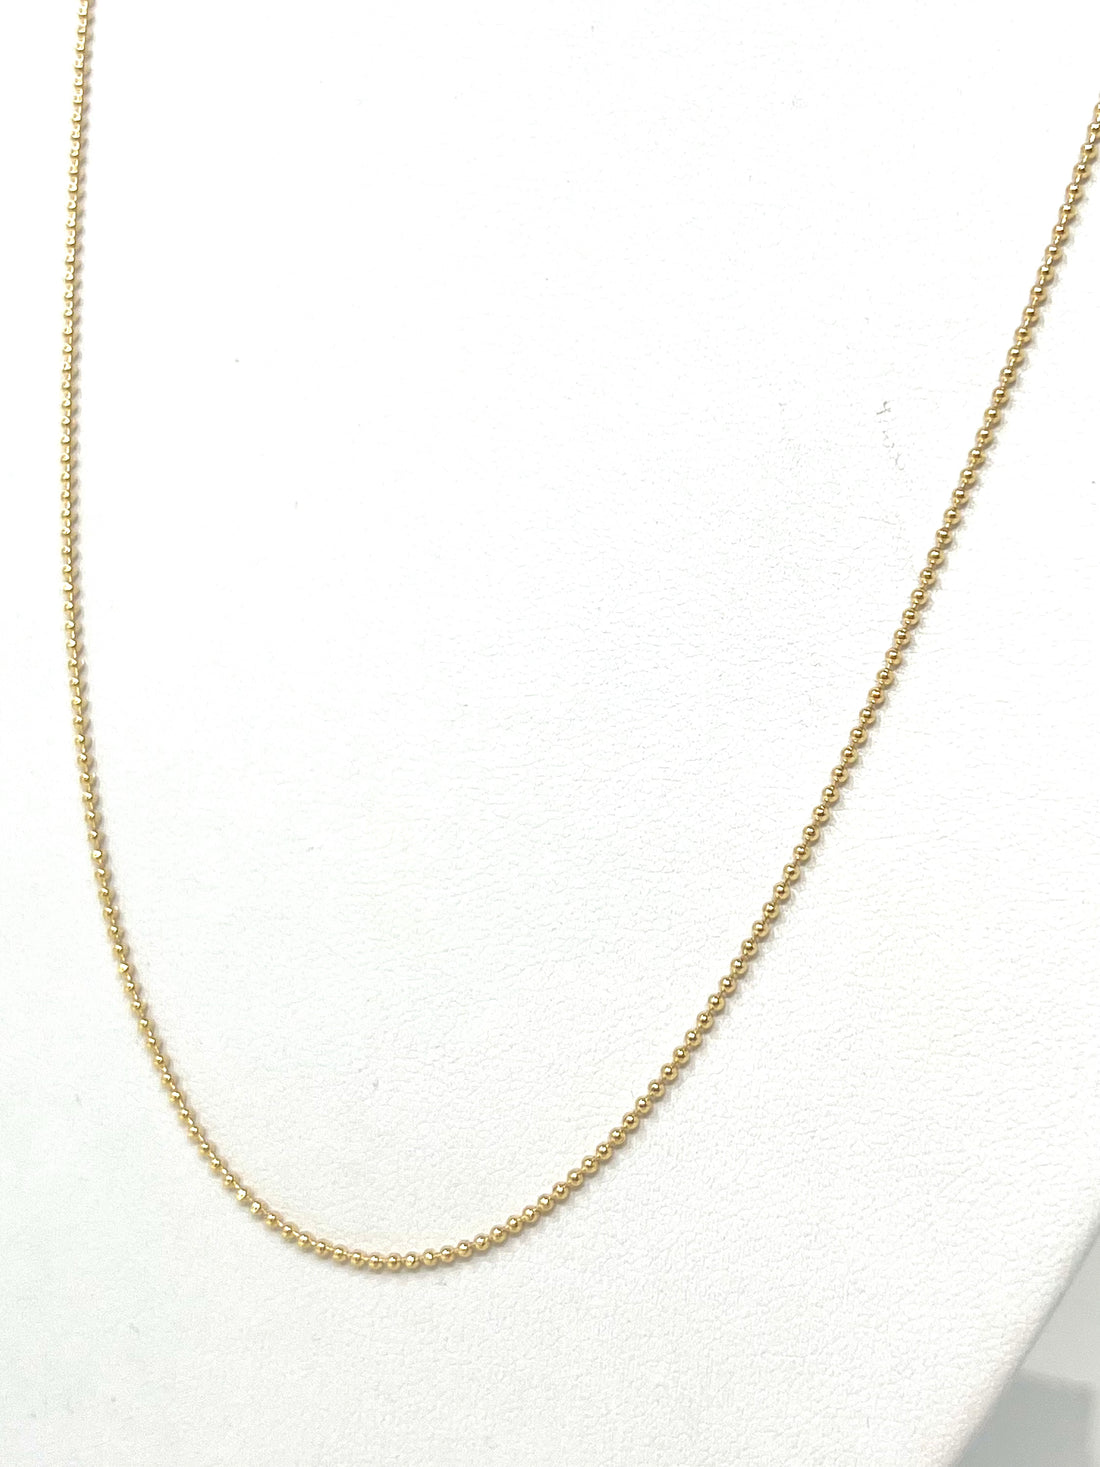 Charming Delicate Ball and Chain Gold 20” Necklace